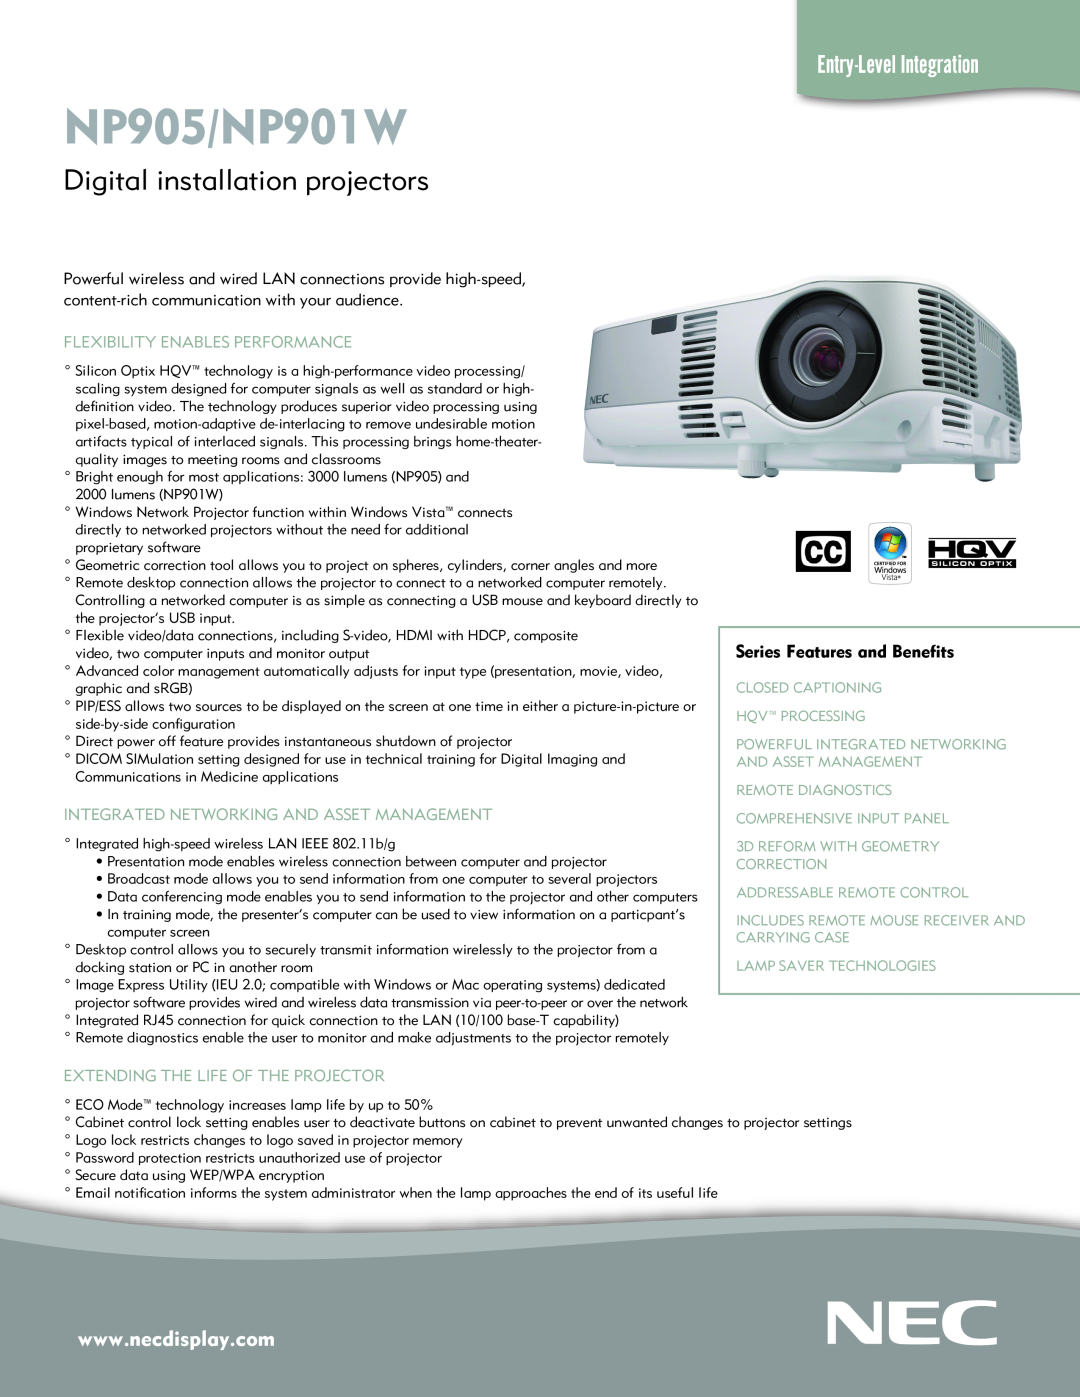 NEC manual NP905/NP901W, Digital installation projectors, Entry-LevelIntegration, Series Features and Benefits 